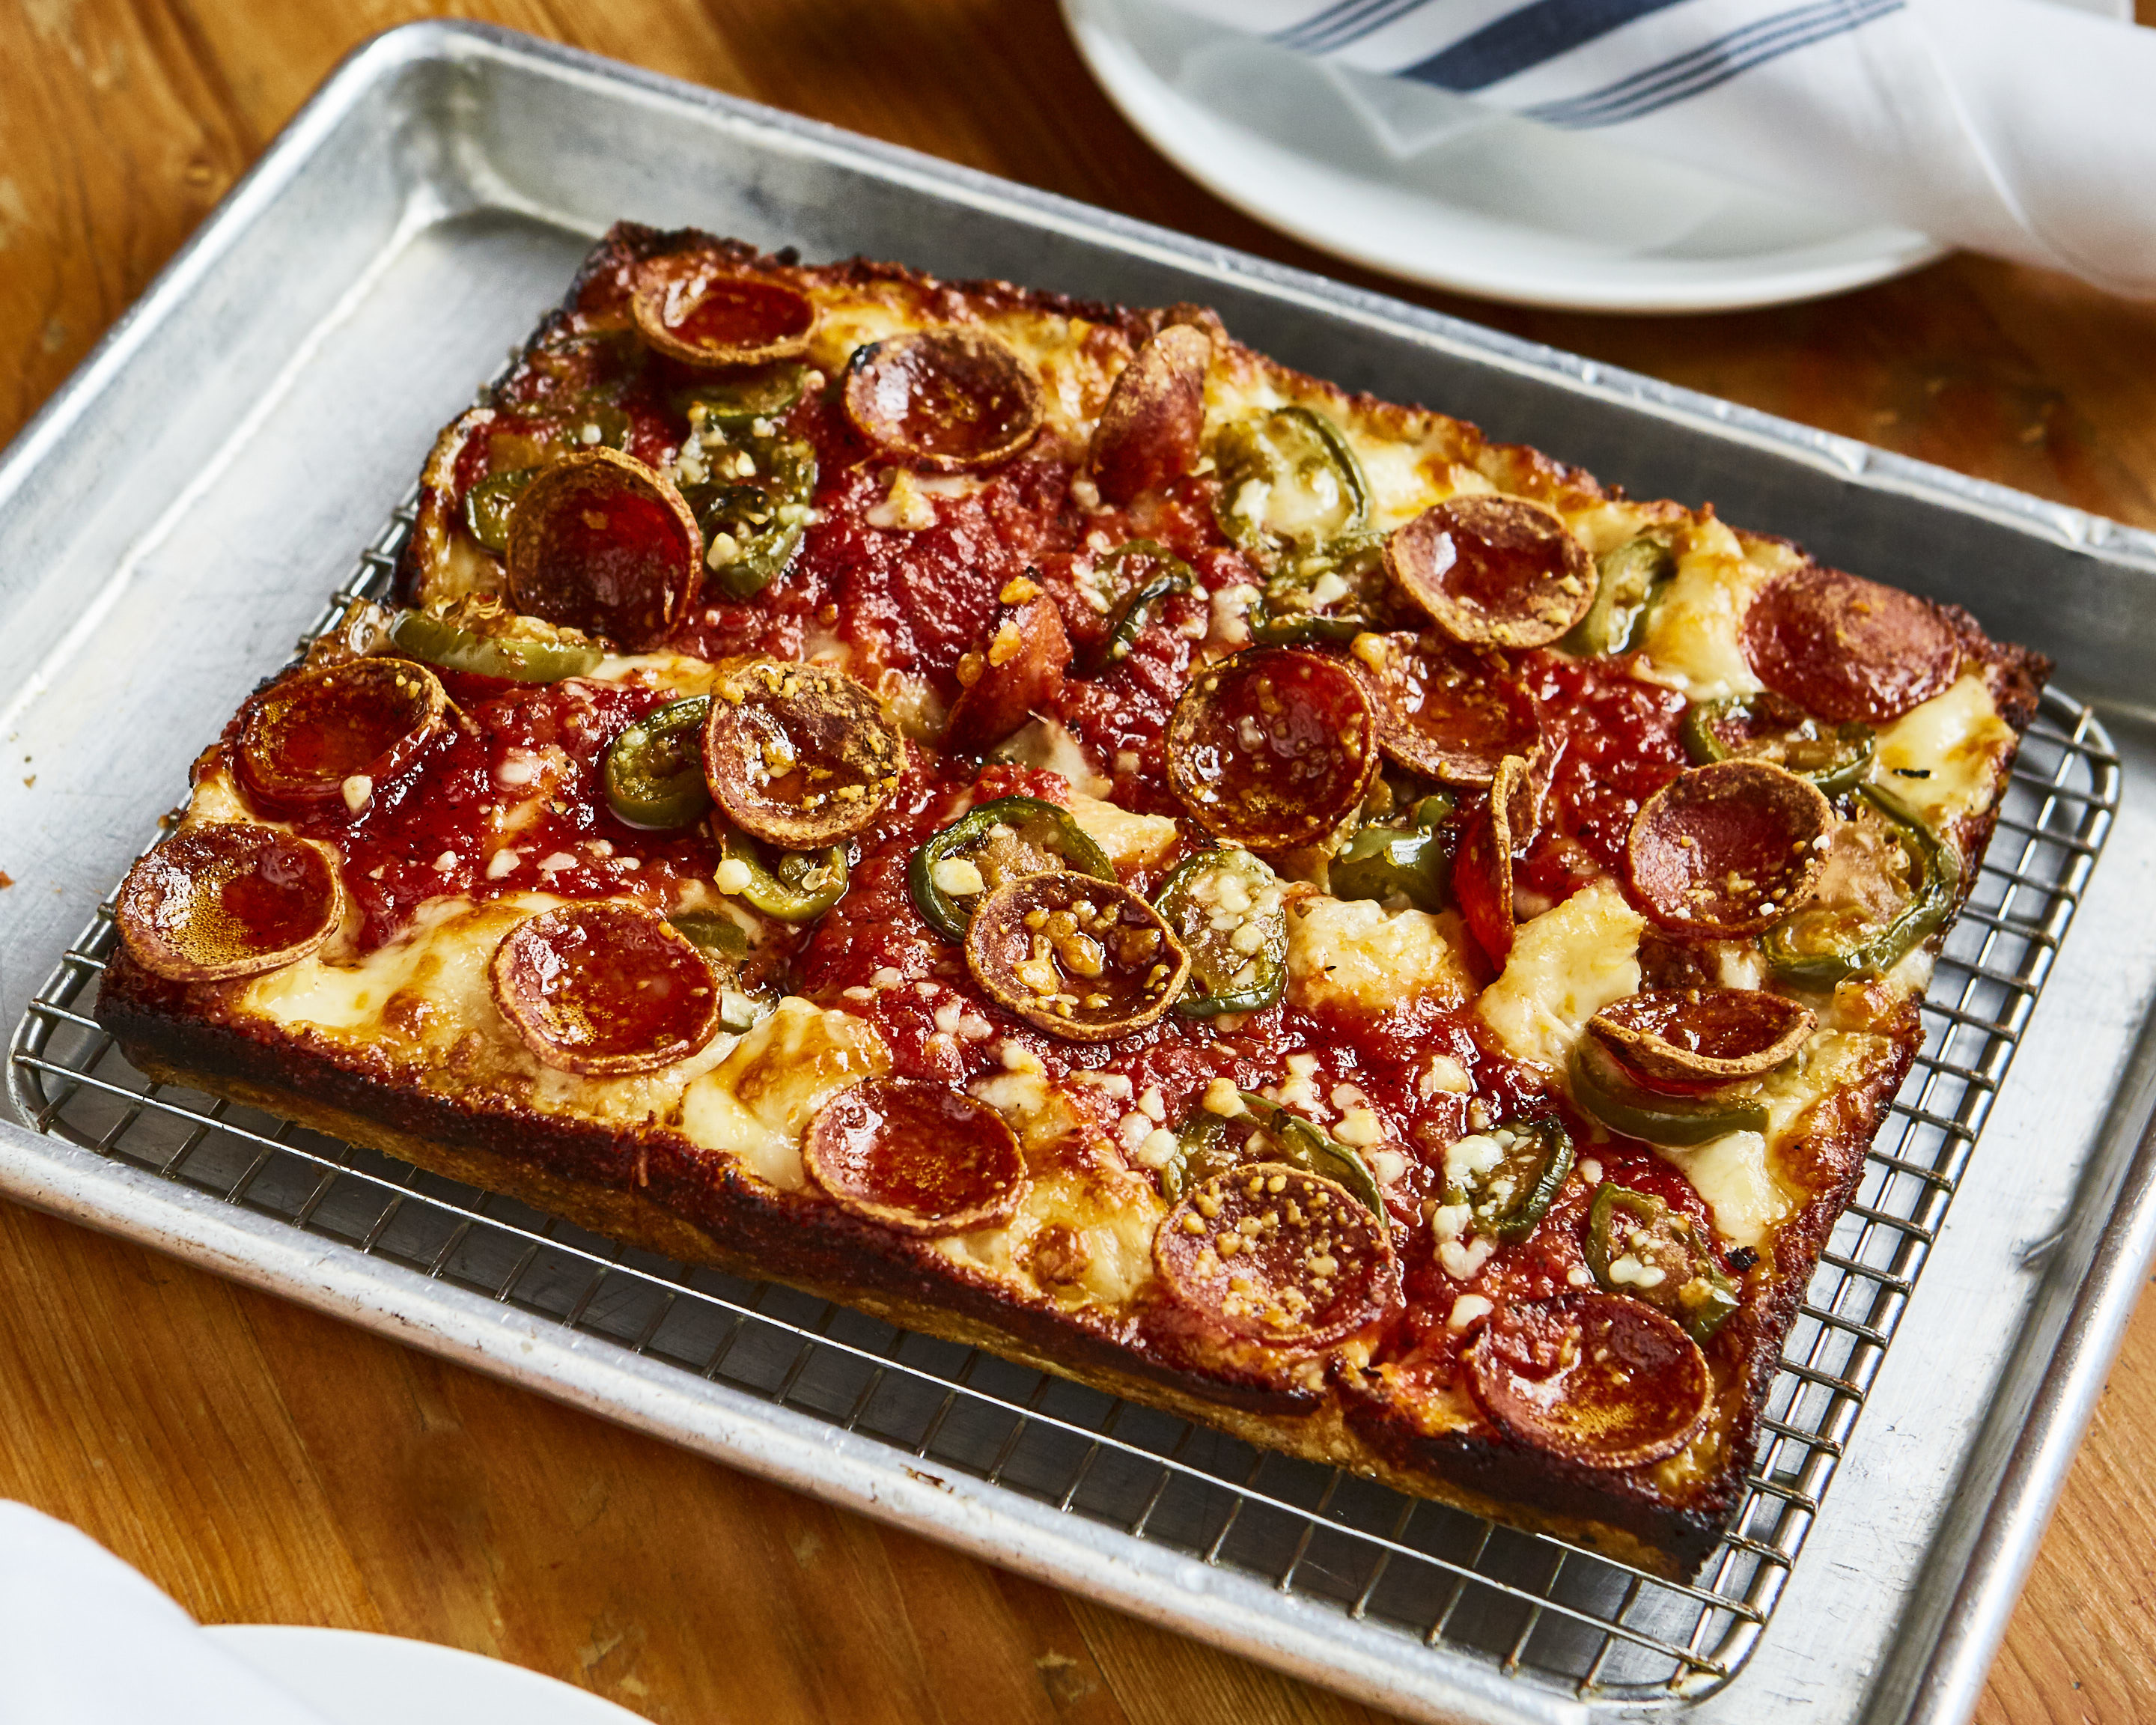 Review of Feel Good Foods' Gluten-Free Detroit-Style Pizza